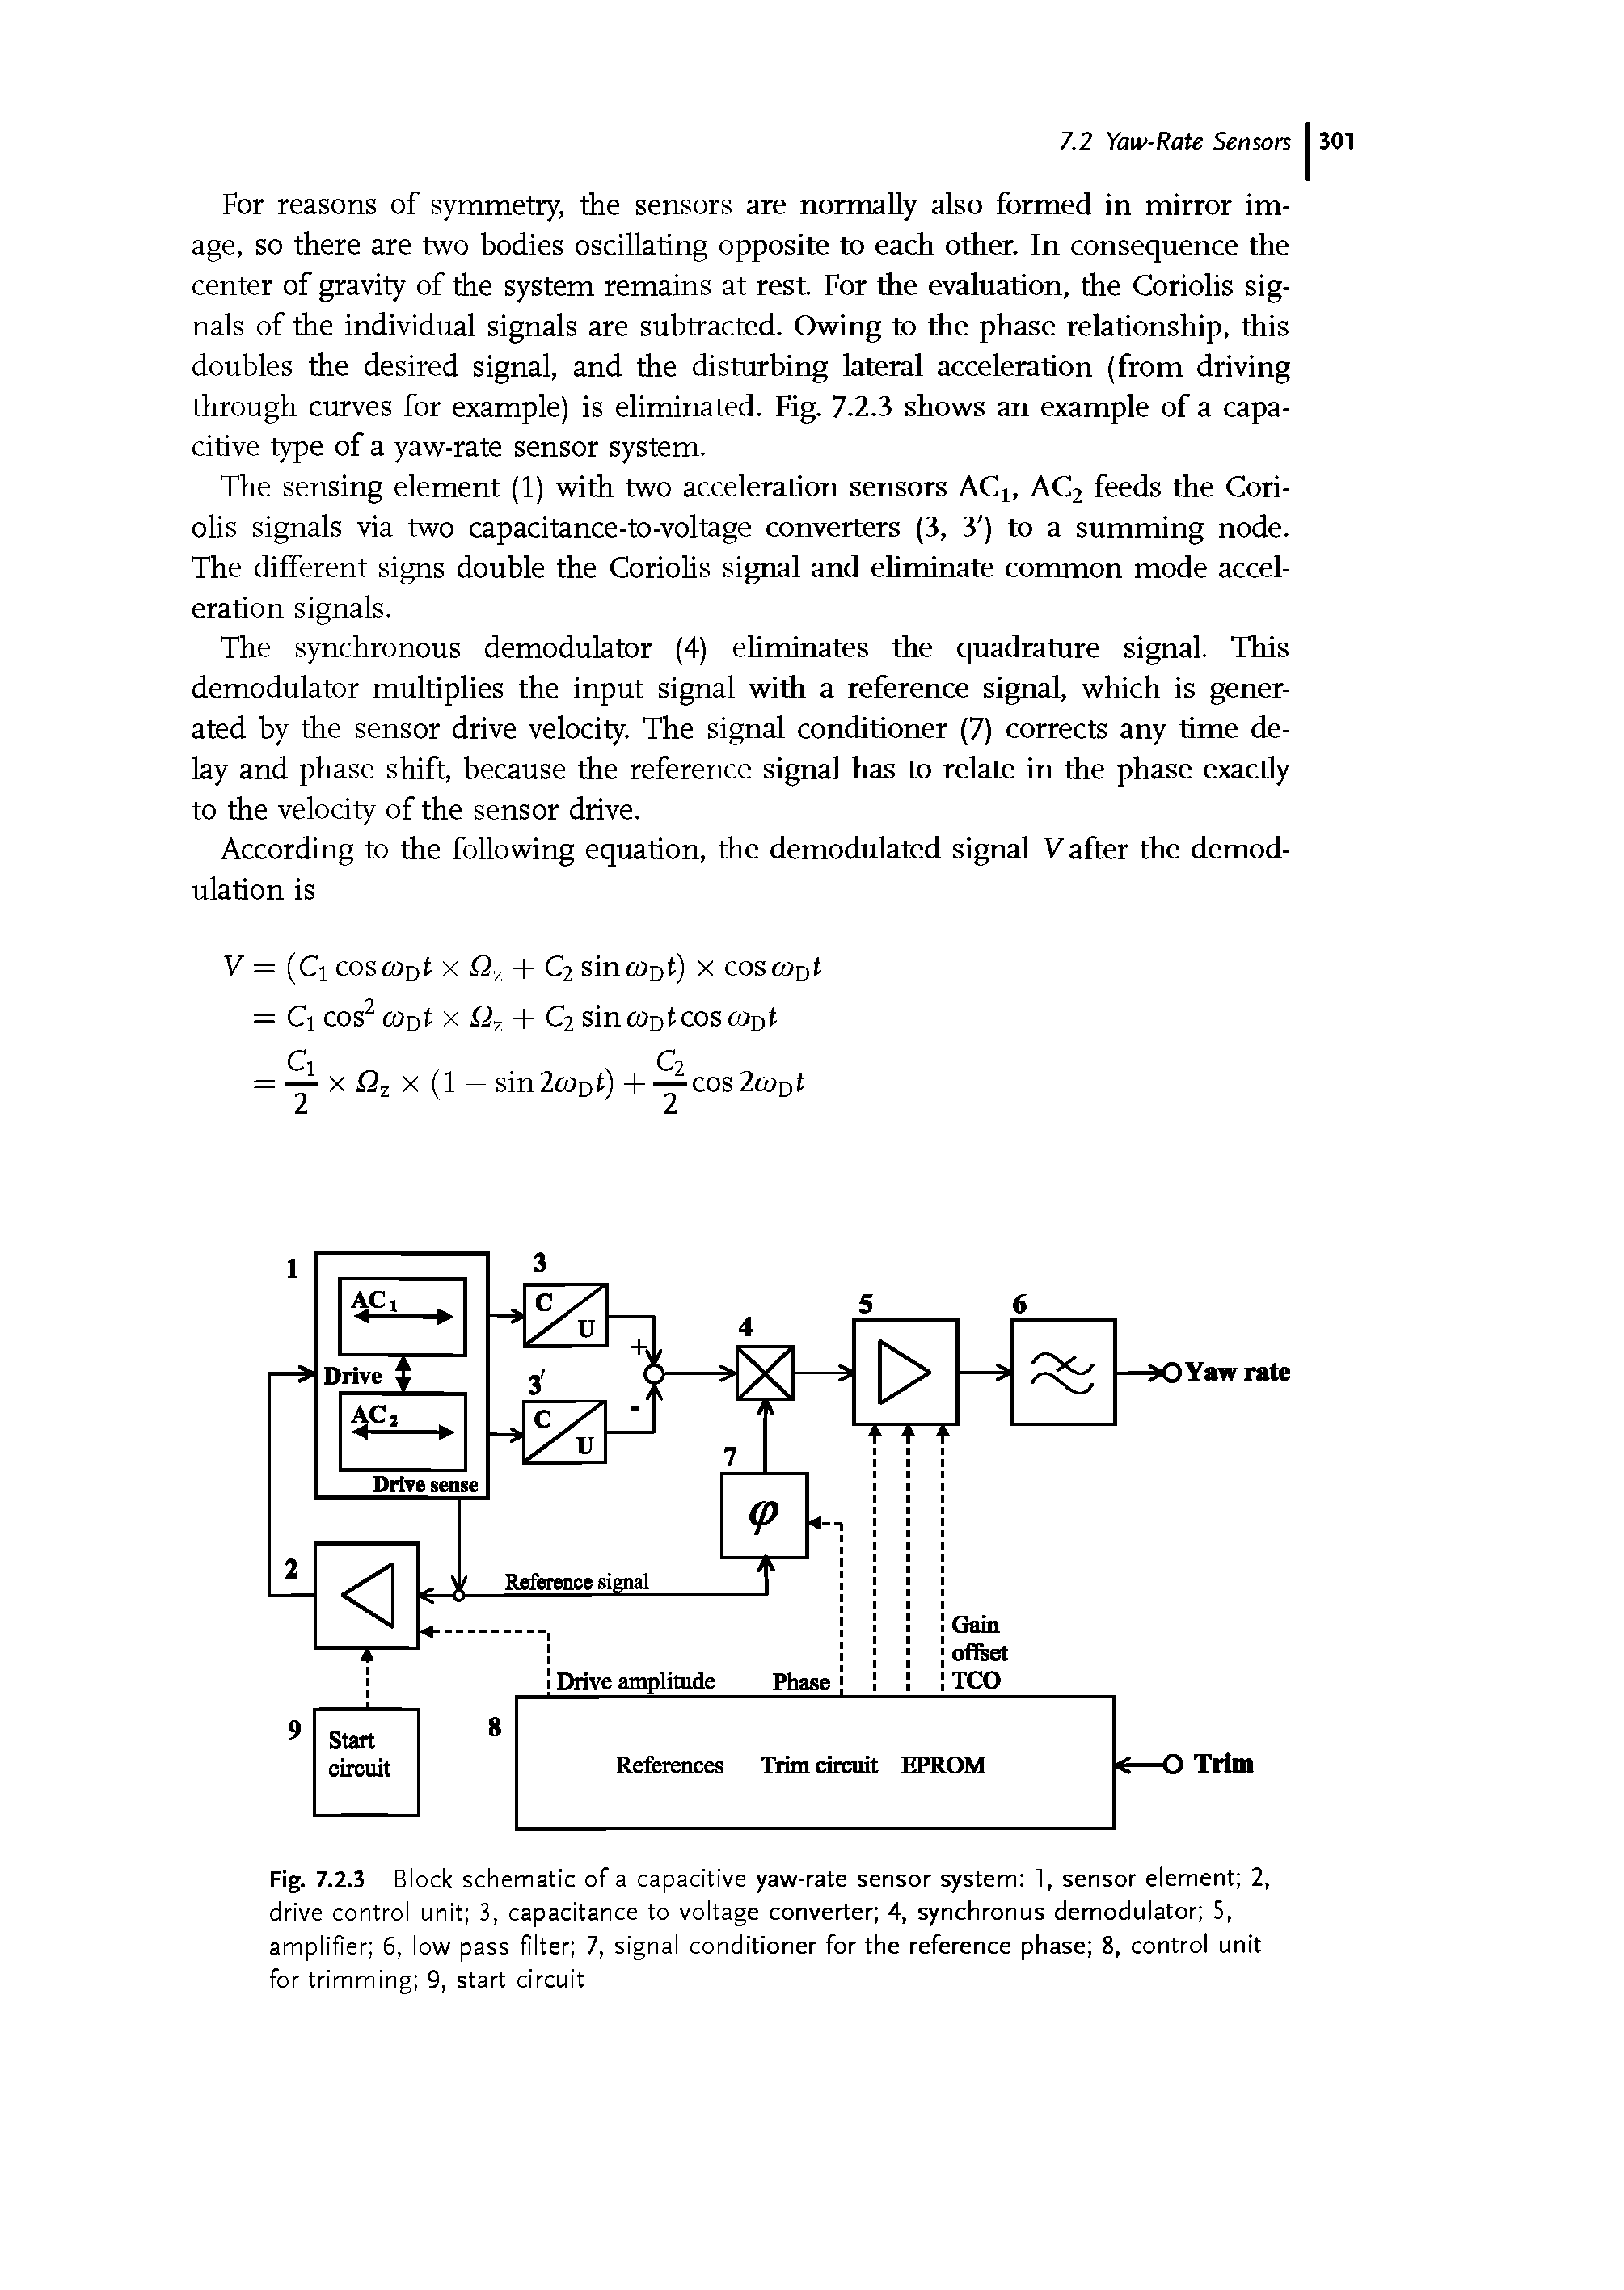 Fig. 7.2.3 Block schematic of a capacitive yaw-rate sensor system 1, sensor element 2, drive control unit 3, capacitance to voltage converter 4, synchronus demodulator 5, amplifier 6, low pass filter 7, signal conditioner for the reference phase 8, control unit...